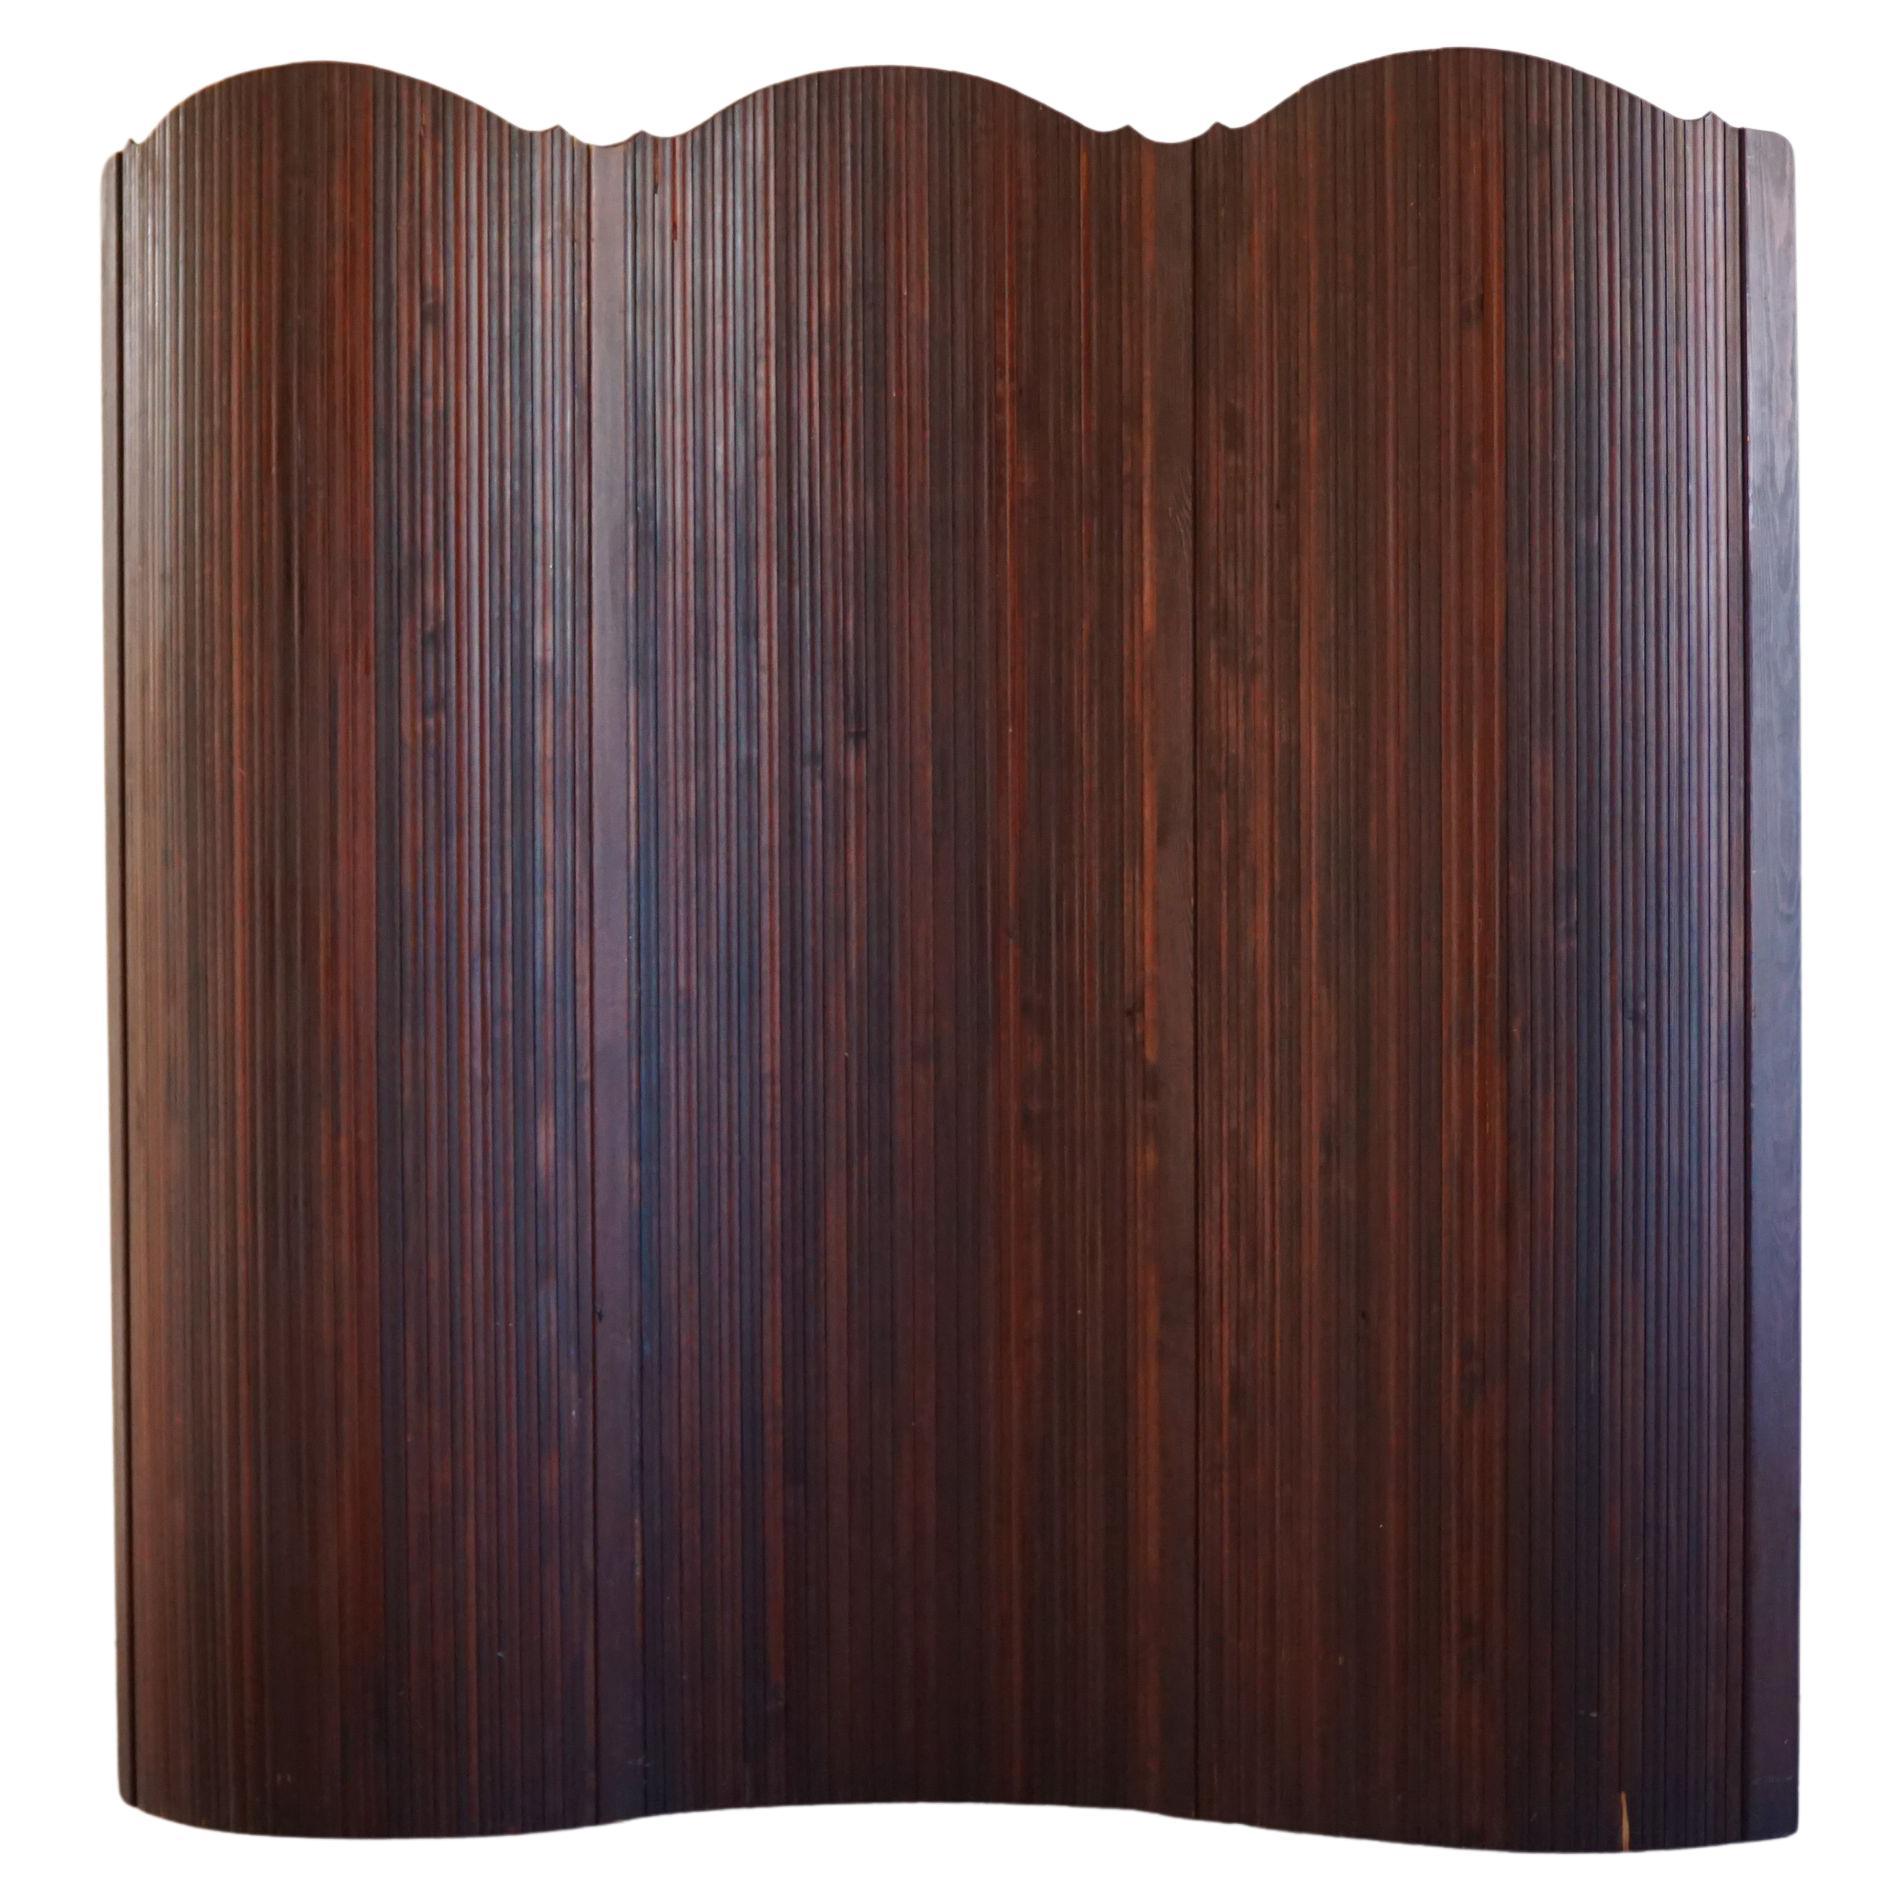 French Art Deco Room Divider in Stained Patinated Pine, Made by S.N.S.A, 1950s